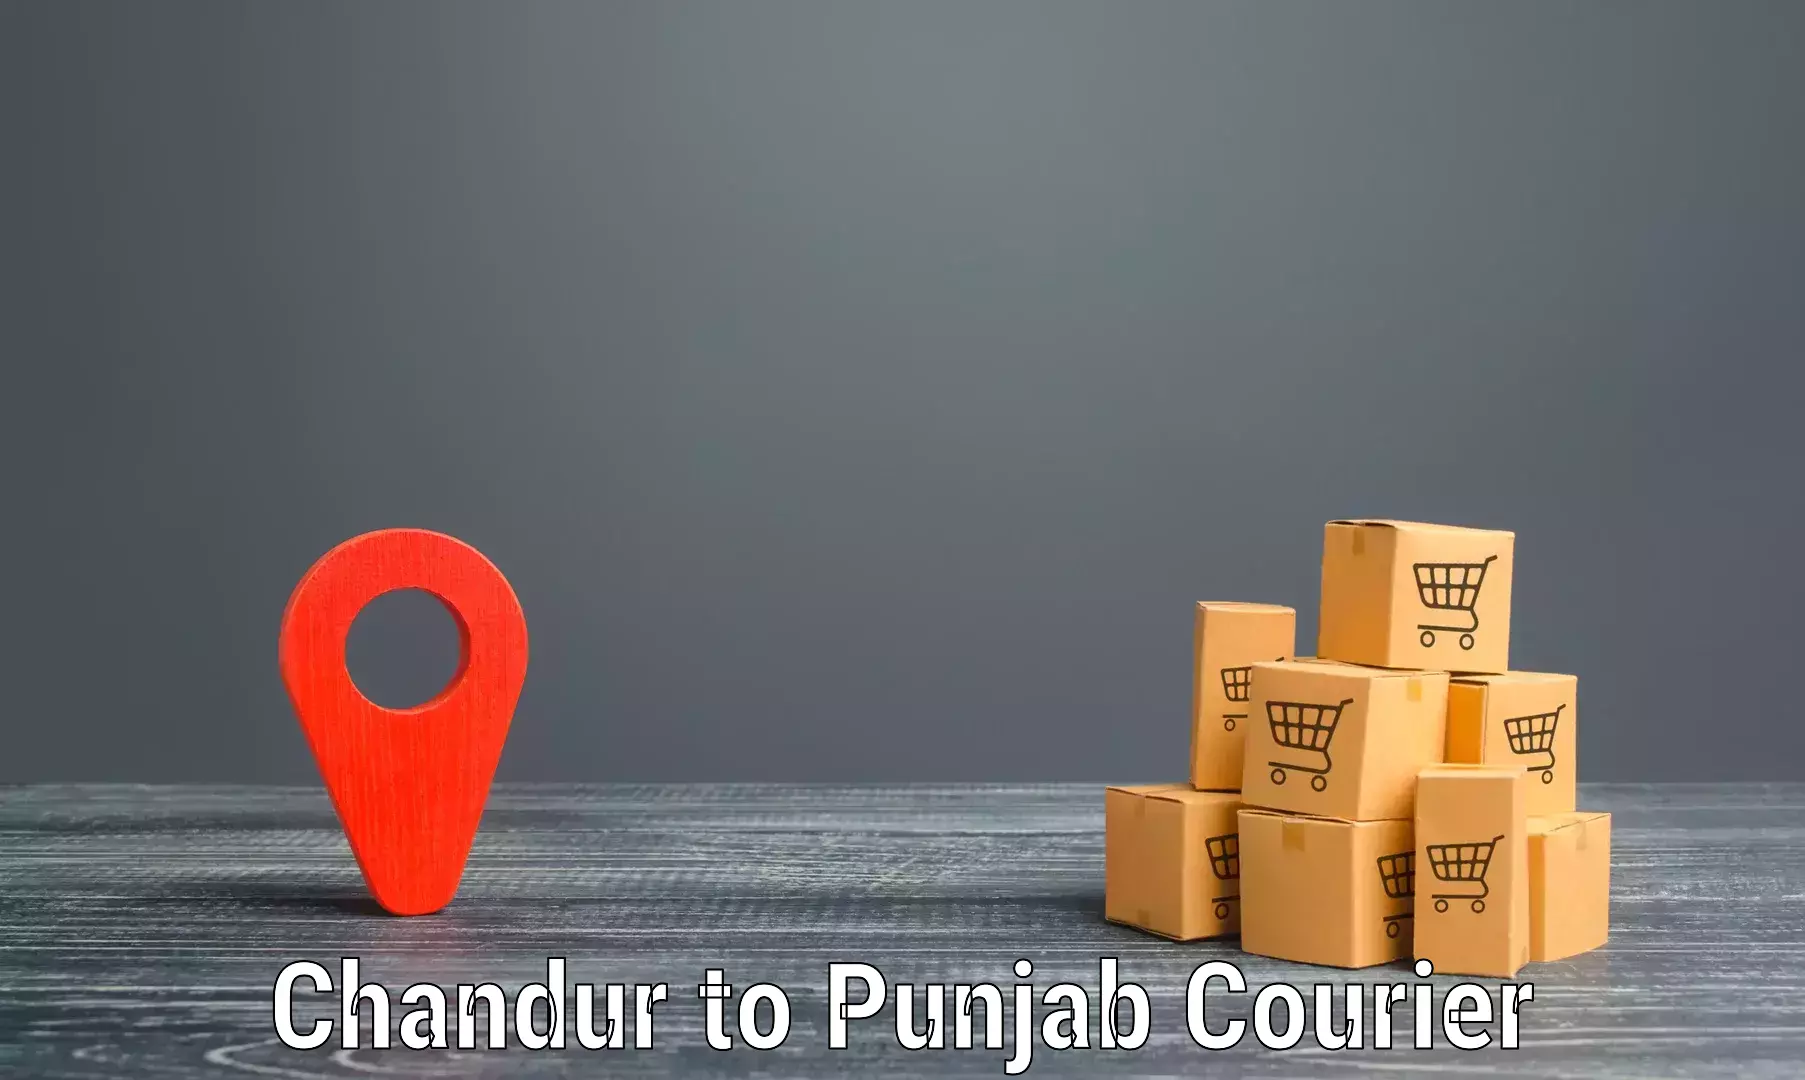 Express delivery solutions Chandur to Faridkot